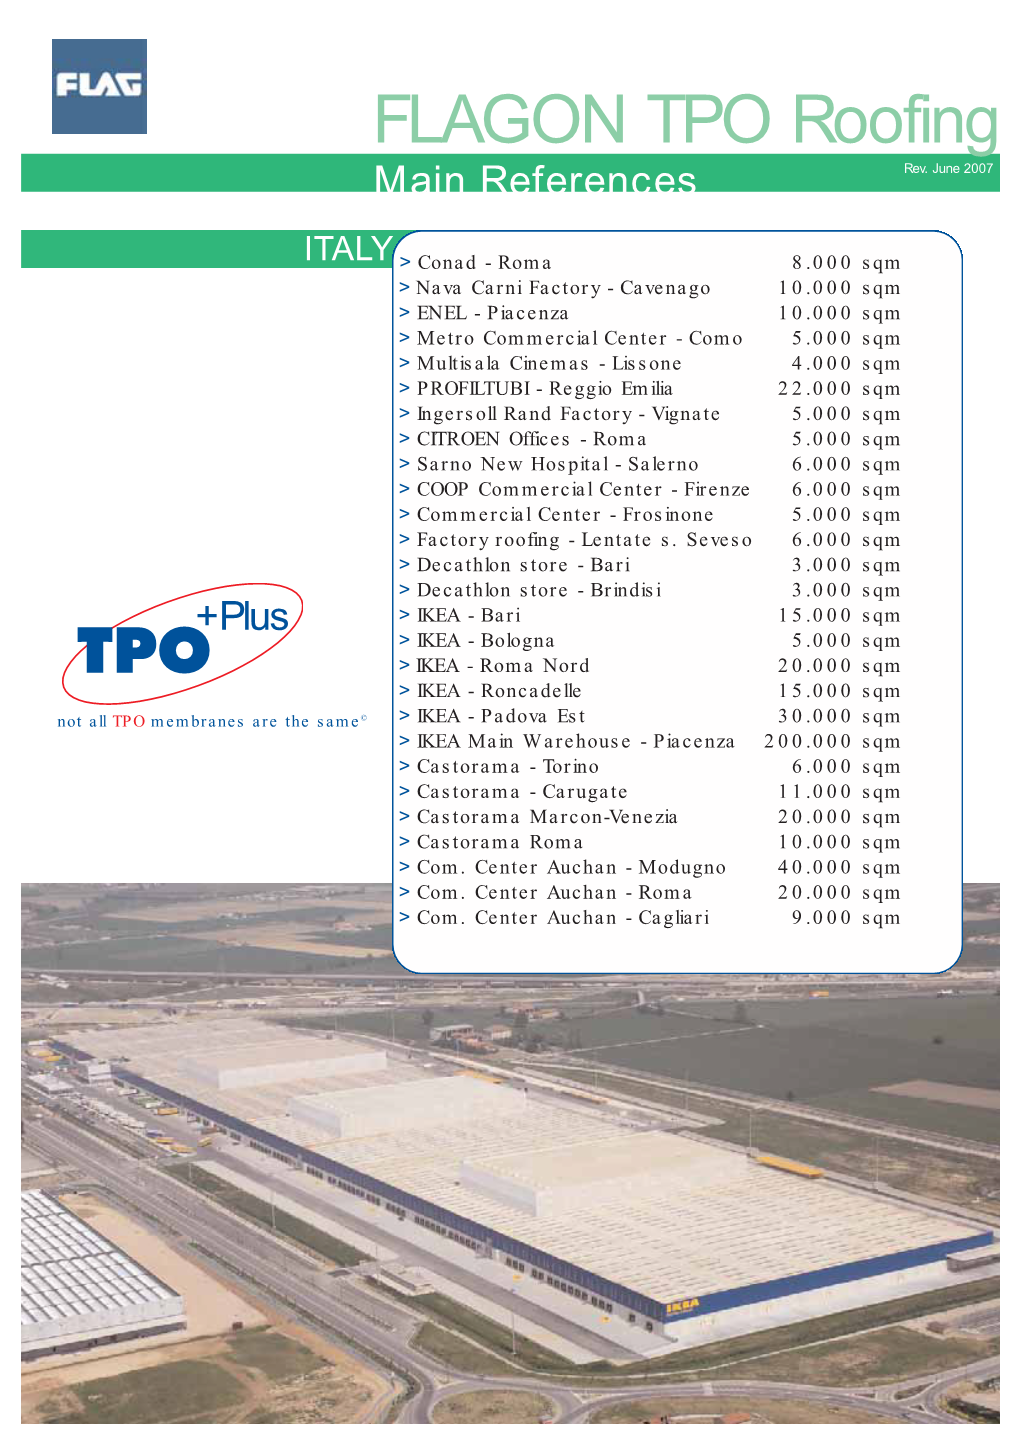 FLAGON TPO Roofing Main References Rev